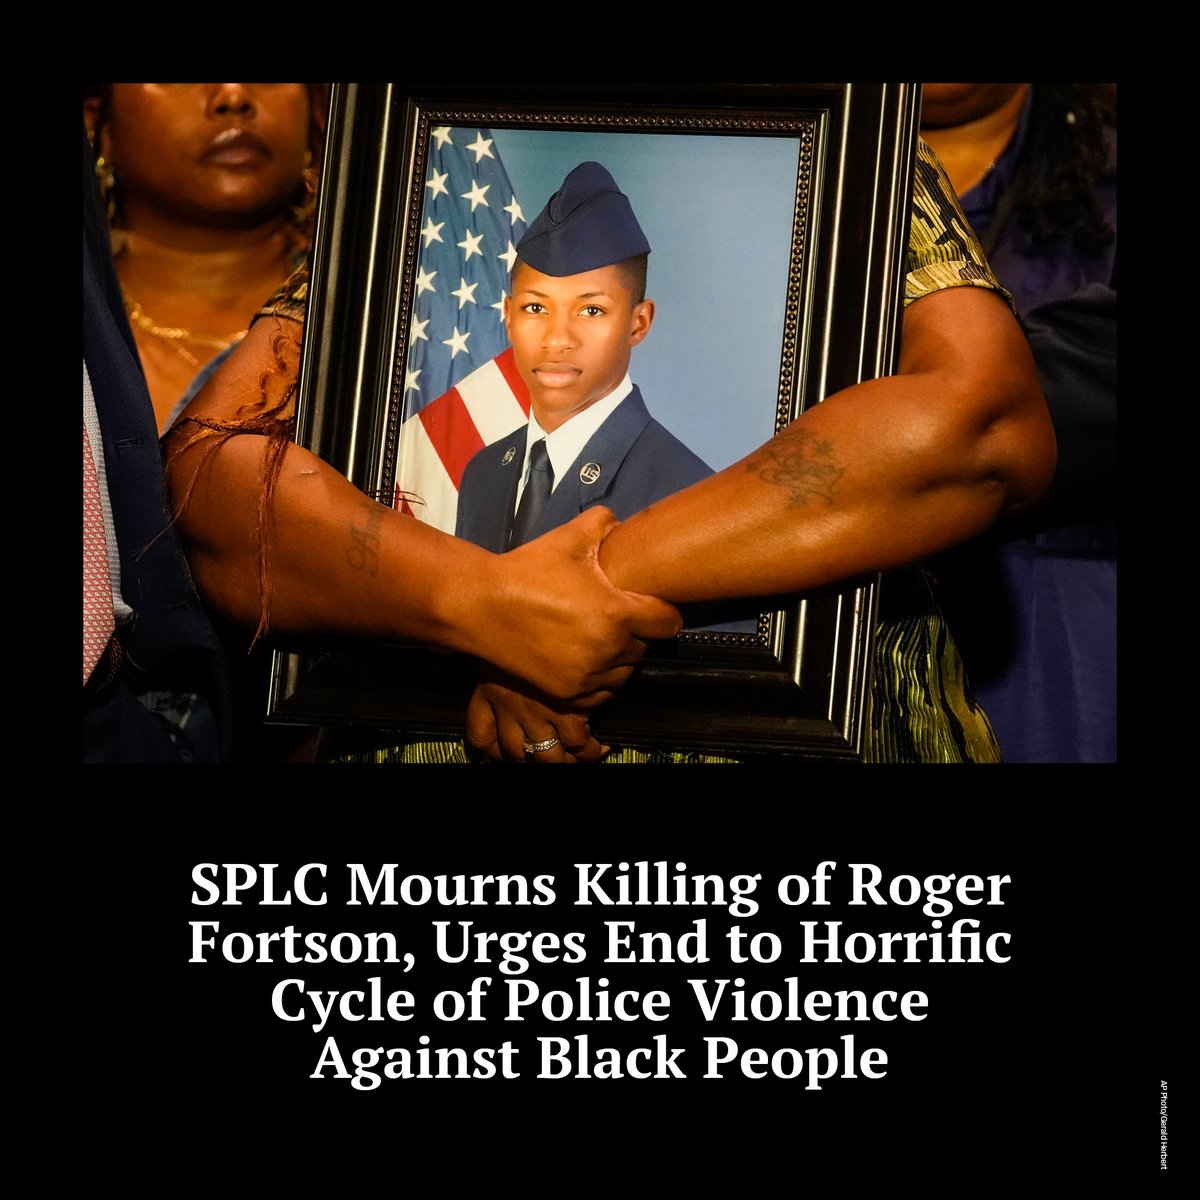 The SPLC is calling for a full investigation into the killing of Roger Fortson, a Black airman in the U.S. Air Force, by sheriff’s deputies in Florida. We urge police departments across the U.S. to address the scourge of anti-Blackness in policing. bit.ly/44DESFW